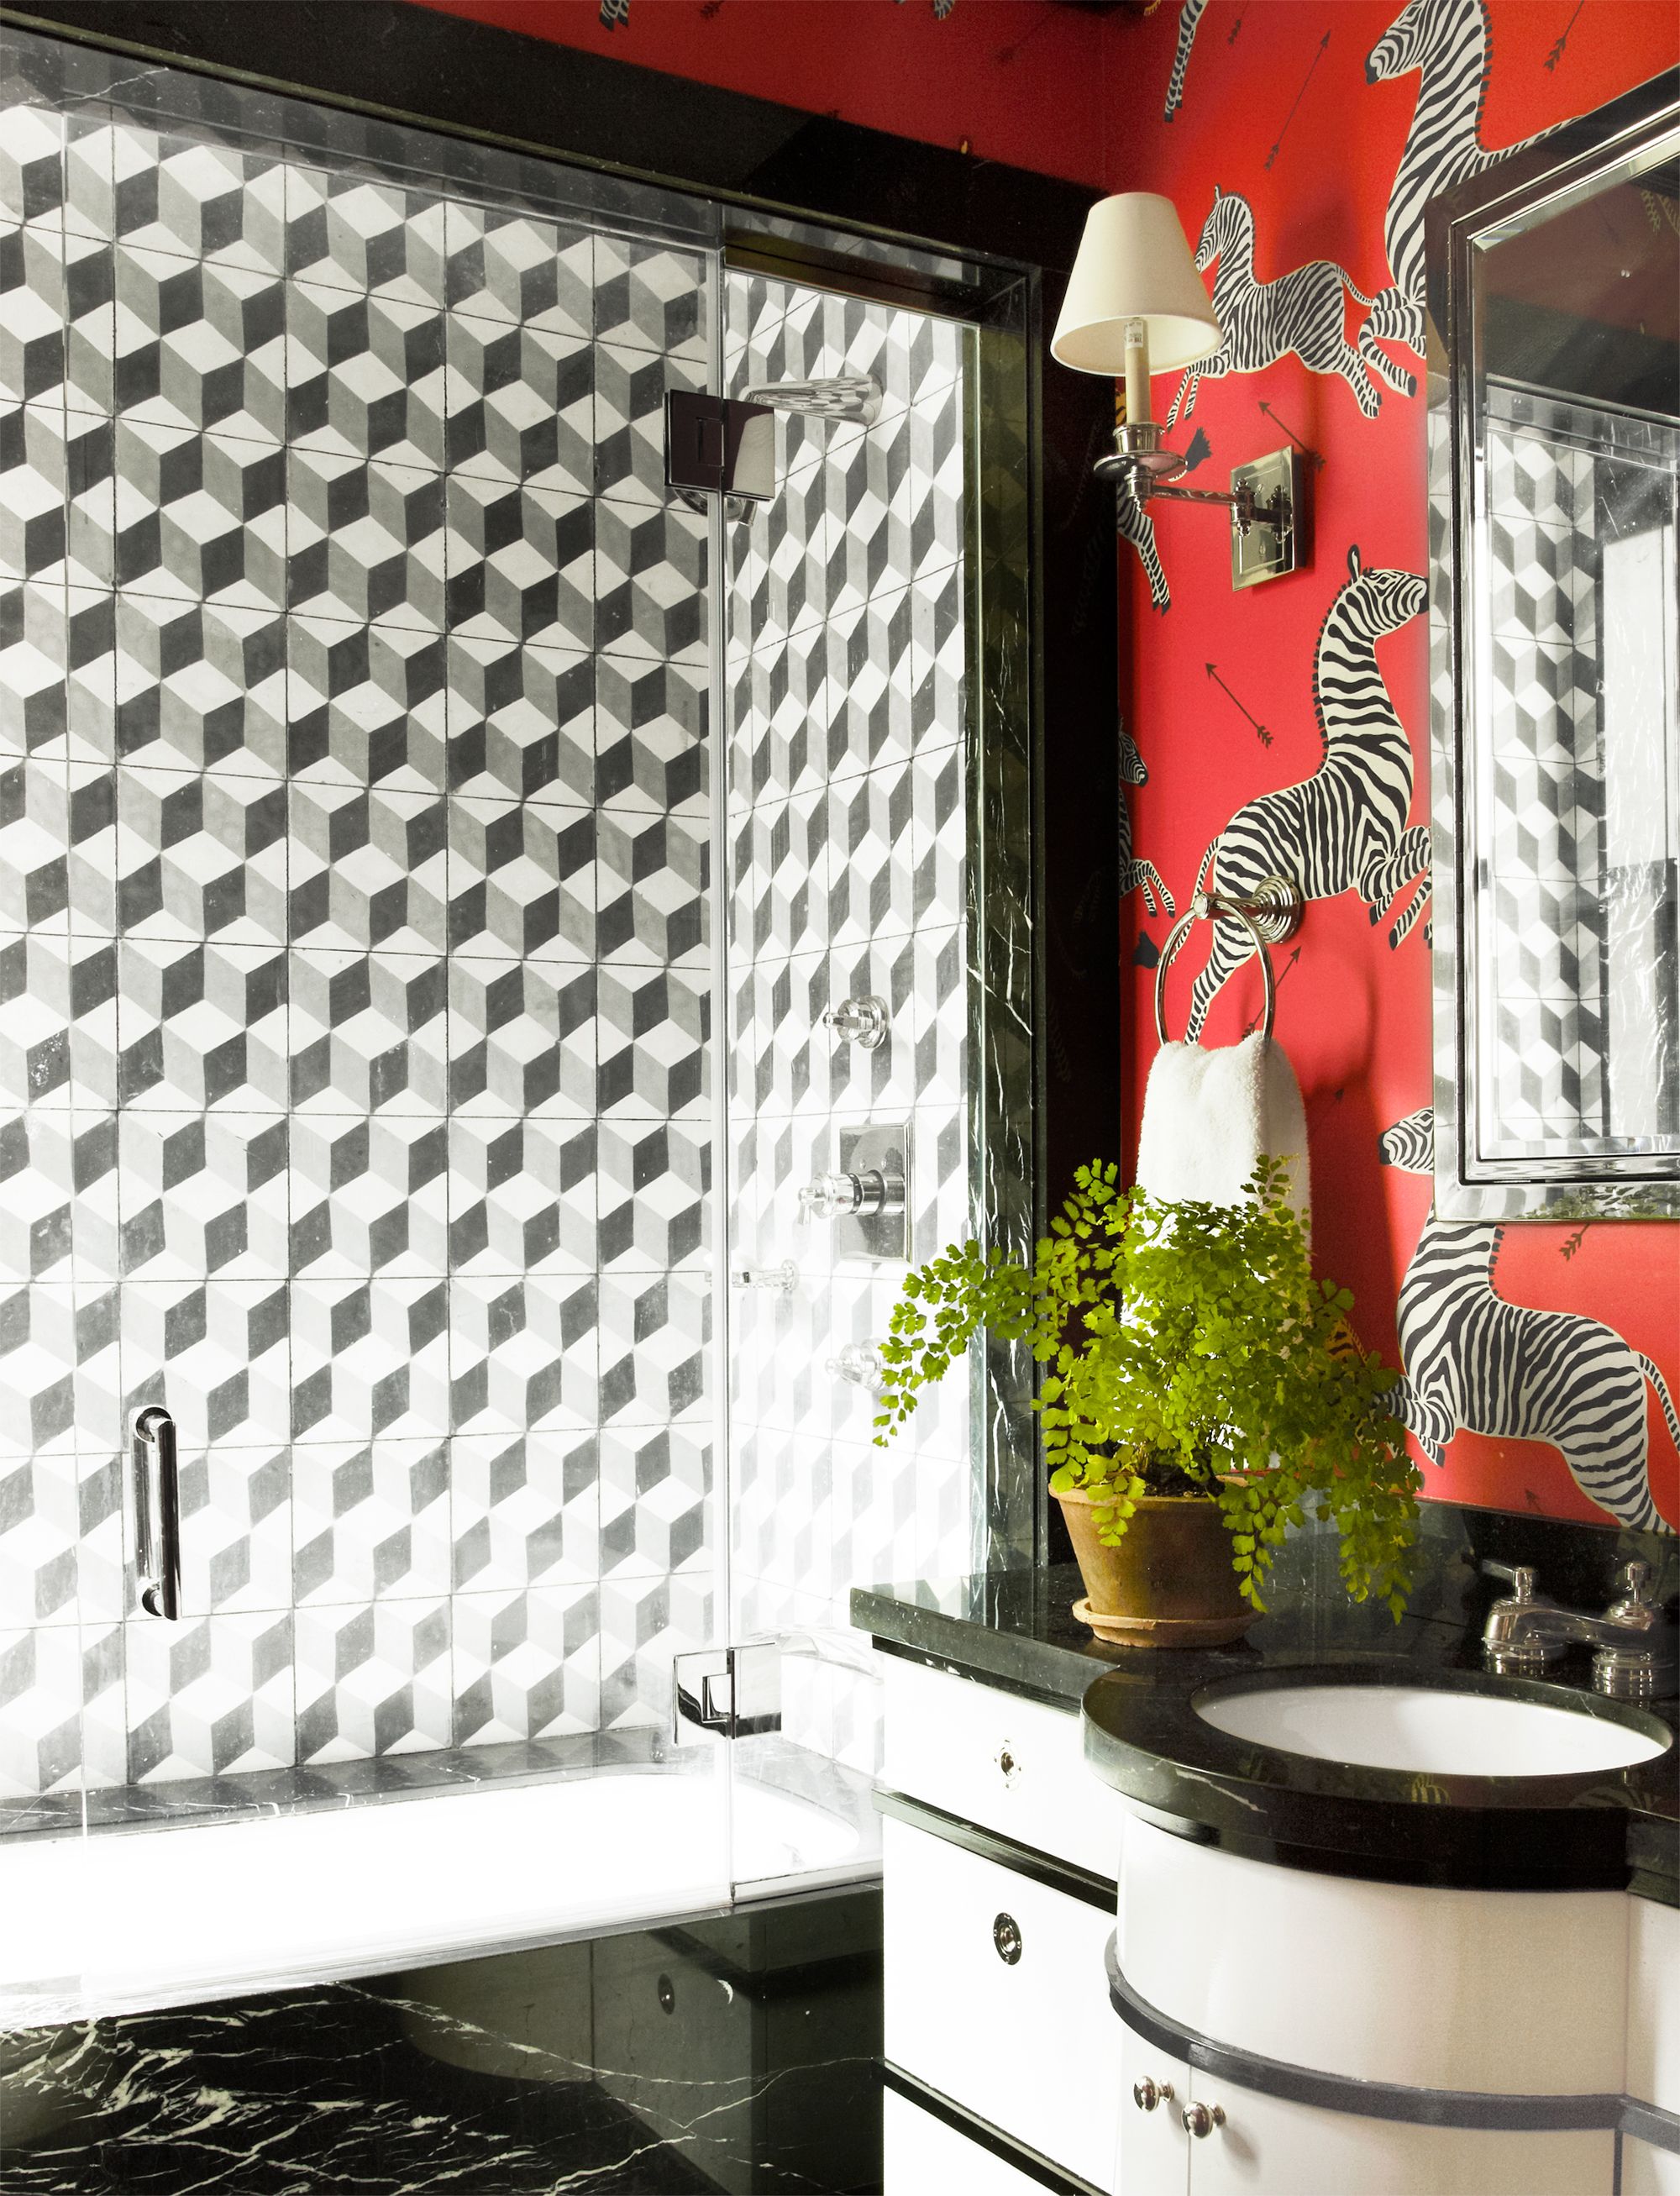 44 Bathroom Wallpaper Ideas That Will Inspire You to be Bold  Wallpaper  for Bathrooms